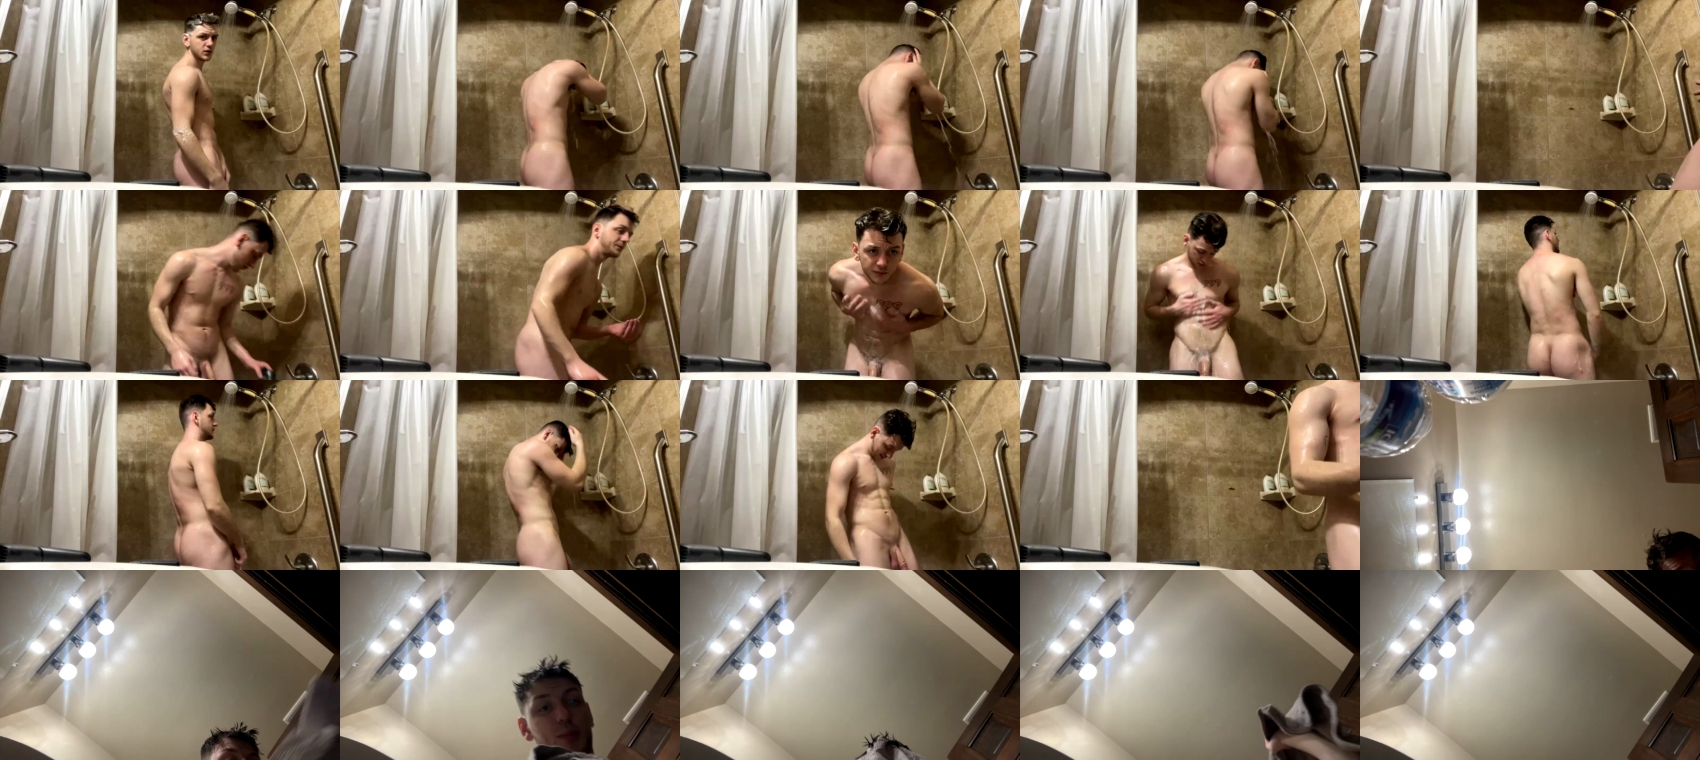 sexylax69  28-12-2021 video Download